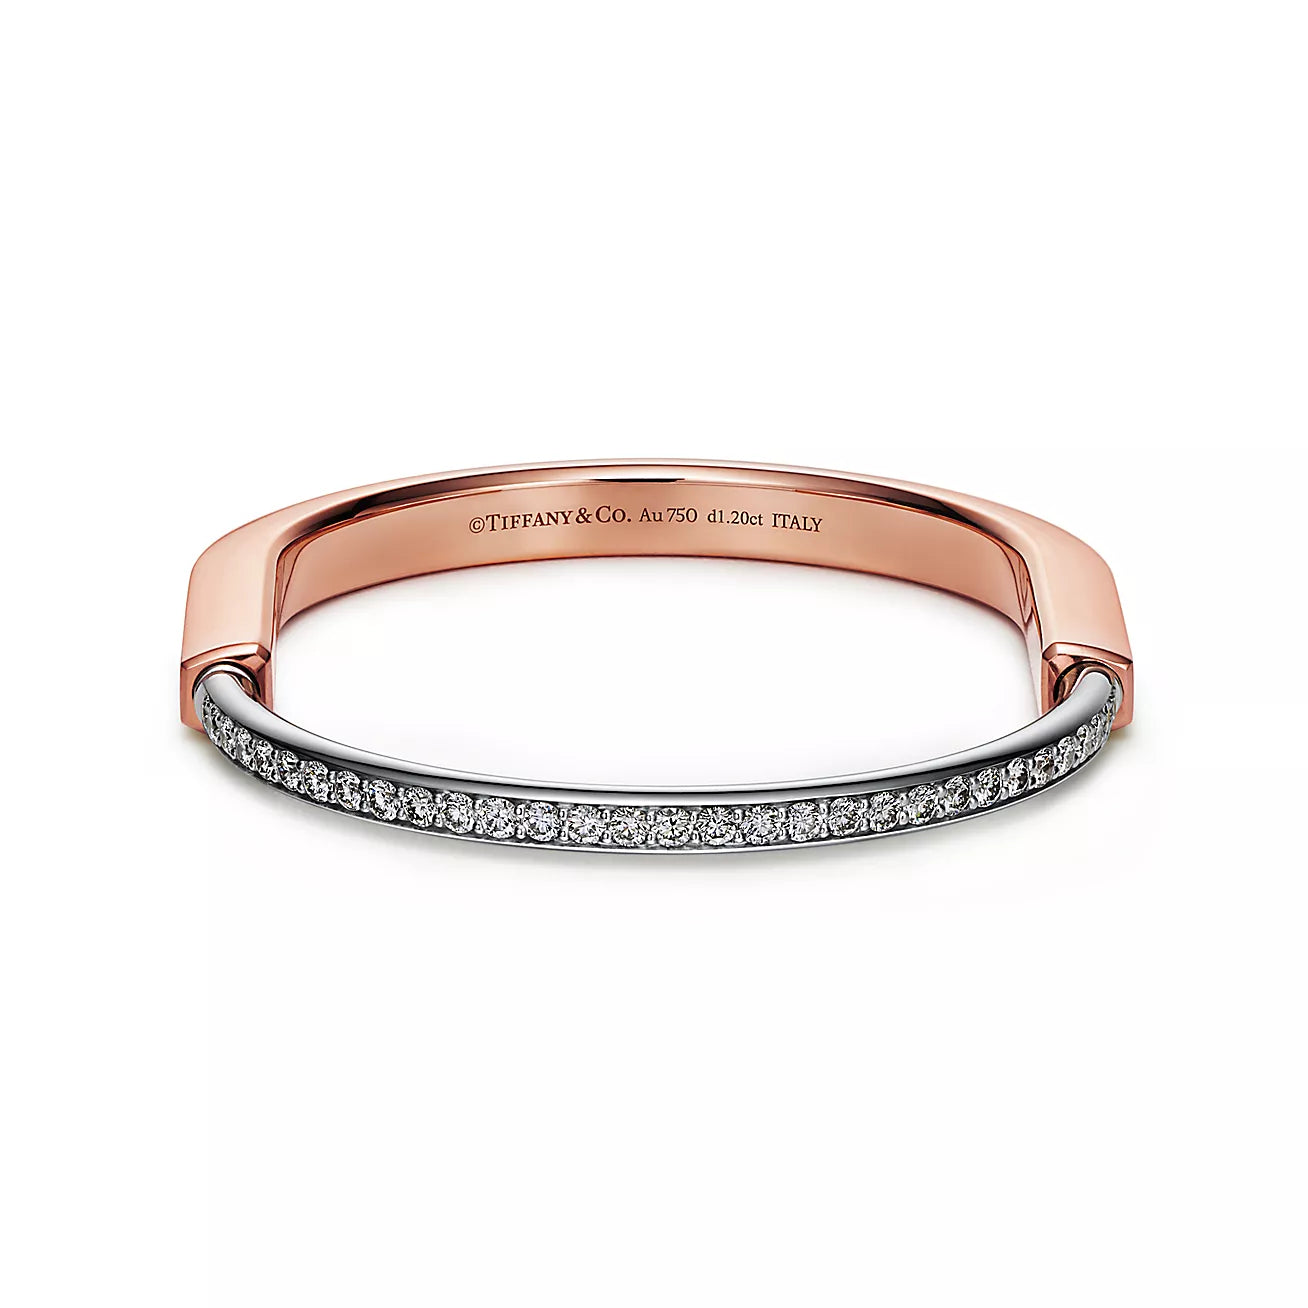 WHITE GOLD AND DIAMOND T CUFFBRACELET TIFFANY  CO  Tiffany  Co   Jewels Online  Jewellery  Sothebys